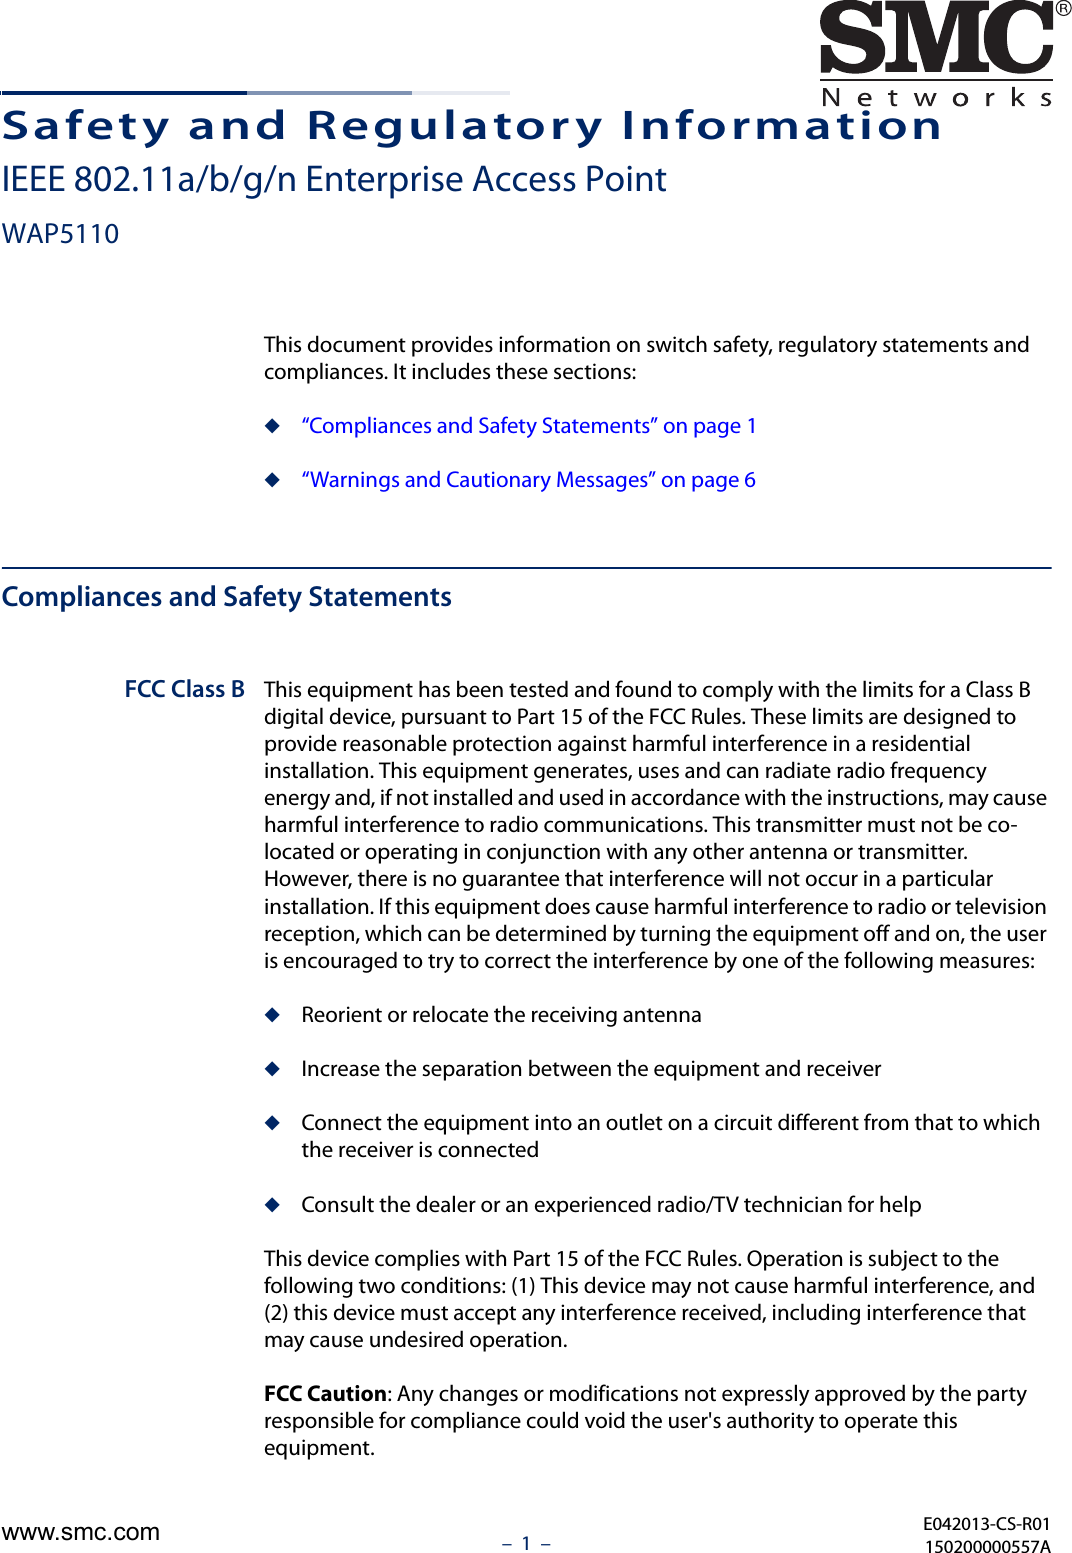 –  1  –Safety and Regulatory InformationIEEE 802.11a/b/g/n Enterprise Access PointWAP5110This document provides information on switch safety, regulatory statements and compliances. It includes these sections:◆“Compliances and Safety Statements” on page 1◆“Warnings and Cautionary Messages” on page 6Compliances and Safety StatementsFCC Class B This equipment has been tested and found to comply with the limits for a Class B digital device, pursuant to Part 15 of the FCC Rules. These limits are designed to provide reasonable protection against harmful interference in a residential installation. This equipment generates, uses and can radiate radio frequency energy and, if not installed and used in accordance with the instructions, may cause harmful interference to radio communications. This transmitter must not be co-located or operating in conjunction with any other antenna or transmitter. However, there is no guarantee that interference will not occur in a particular installation. If this equipment does cause harmful interference to radio or television reception, which can be determined by turning the equipment off and on, the user is encouraged to try to correct the interference by one of the following measures:◆Reorient or relocate the receiving antenna◆Increase the separation between the equipment and receiver◆Connect the equipment into an outlet on a circuit different from that to which the receiver is connected◆Consult the dealer or an experienced radio/TV technician for helpThis device complies with Part 15 of the FCC Rules. Operation is subject to the following two conditions: (1) This device may not cause harmful interference, and (2) this device must accept any interference received, including interference that may cause undesired operation.FCC Caution: Any changes or modifications not expressly approved by the party responsible for compliance could void the user&apos;s authority to operate this equipment. E042013-CS-R01150200000557Awww.smc.com